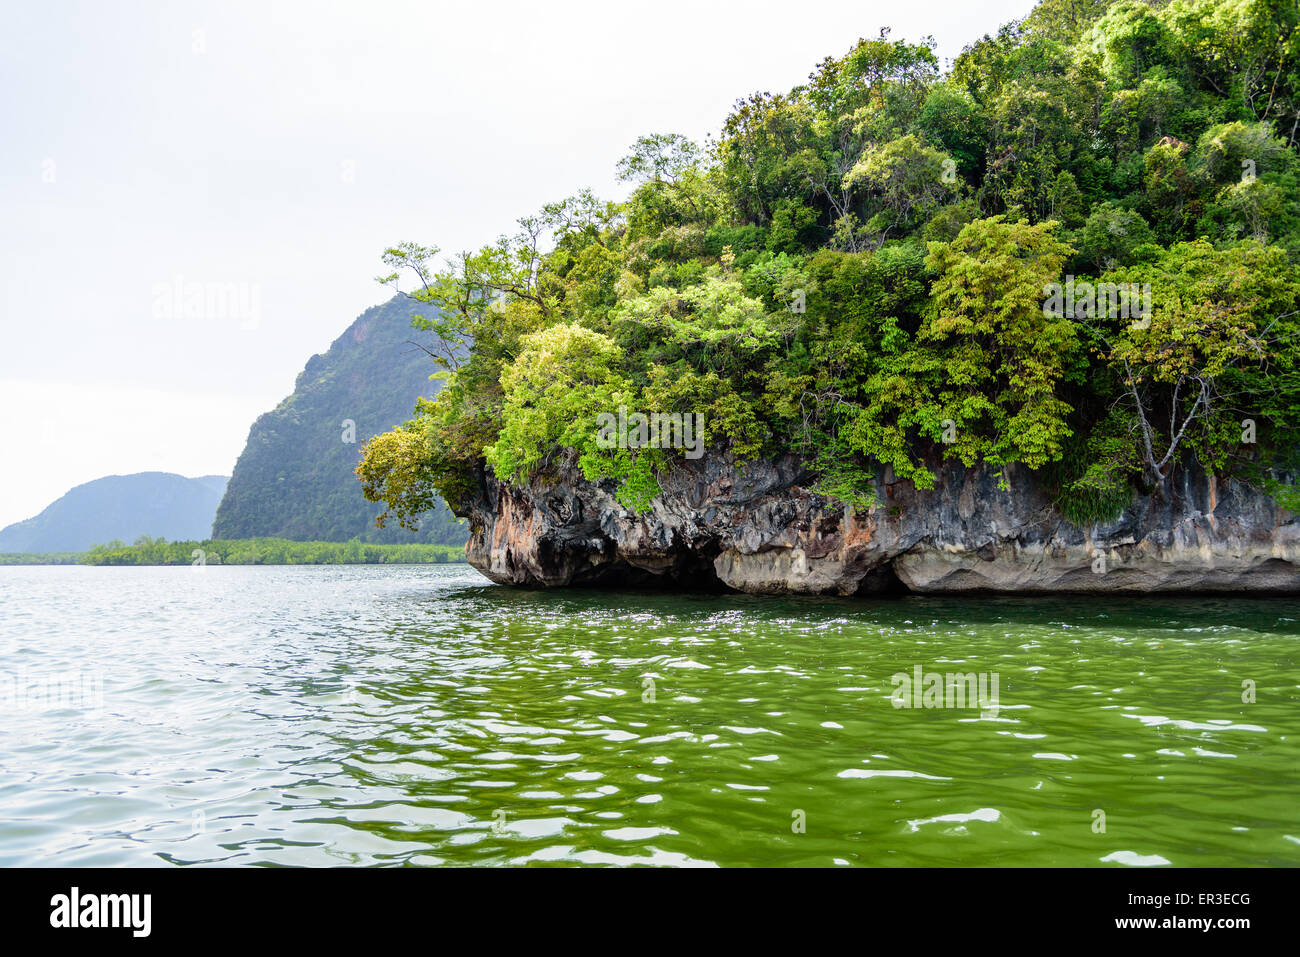 Beautiful scenery of the island and the green sea during travel by boat in Phang Nga Bay or Ao Phang Nga National Park, Thailand Stock Photo